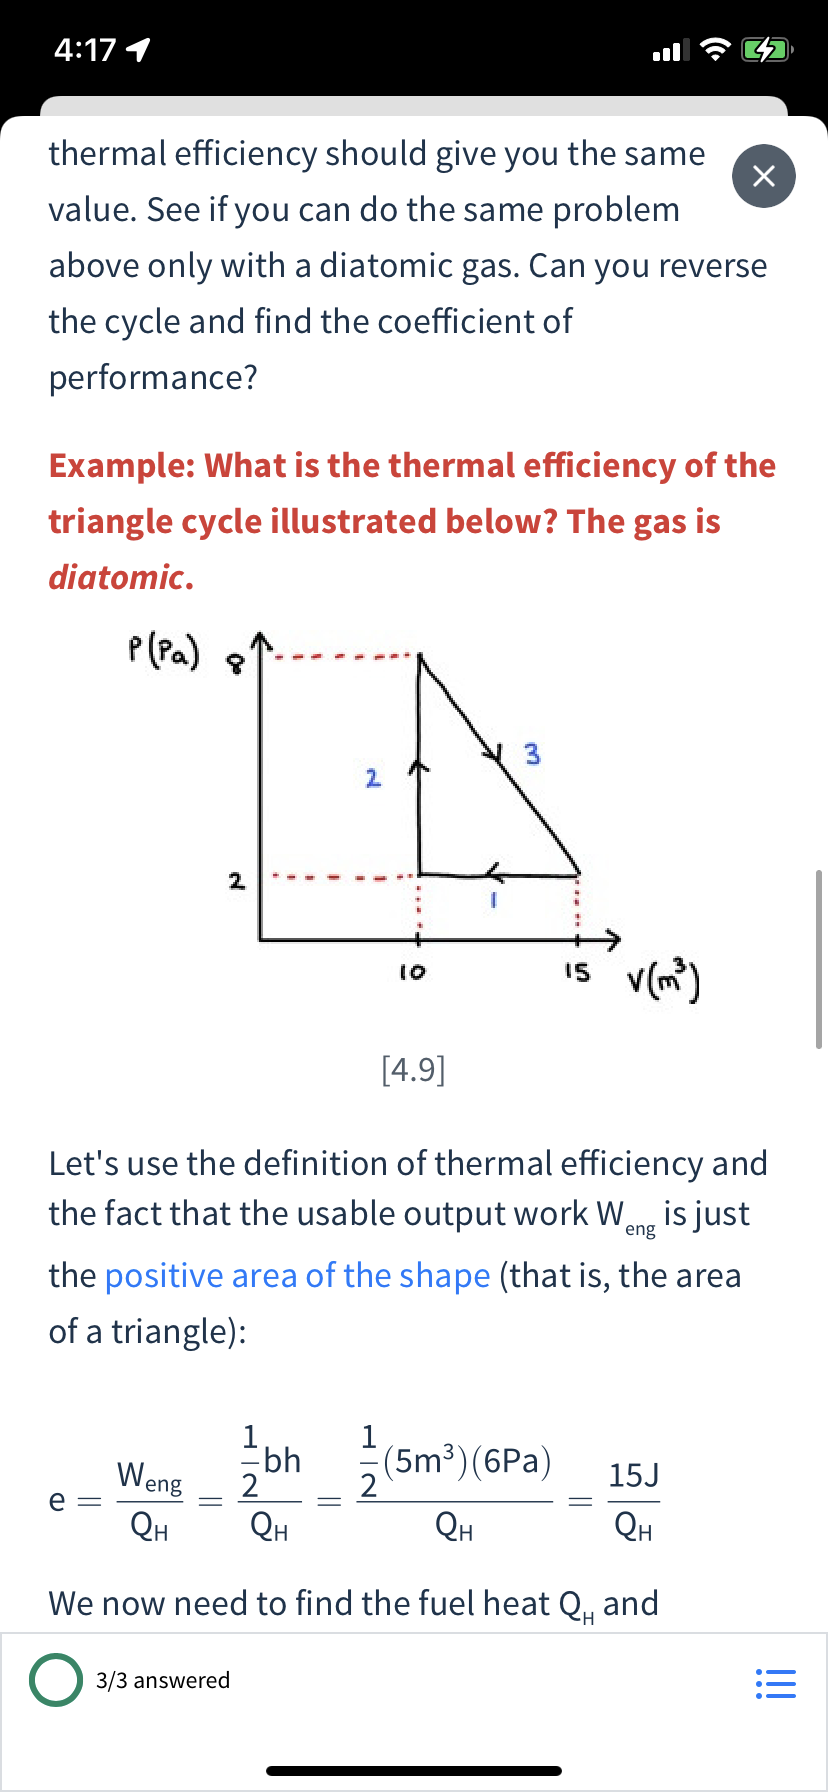 4:17 1
thermal efficiency should give you the same
value. See if you can do the same problem
above only with a diatomic gas. Can you reverse
the cycle and find the coefficient of
performance?
Example: What is the thermal efficiency of the
triangle cycle illustrated below? The gas is
diatomic.
P(Pa) ?
2.
2
I5 v(m)
10
[4.9]
Let's use the definition of thermal efficiency and
the fact that the usable output work Wang is just
the positive area of the shape (that is, the area
of a triangle):
Ebh
2
(5m³)(6Pa)
2
QH
Weng
15J
e
QH
QH
QH
We now need to find the fuel heat Q, and
3/3 answered
!!
